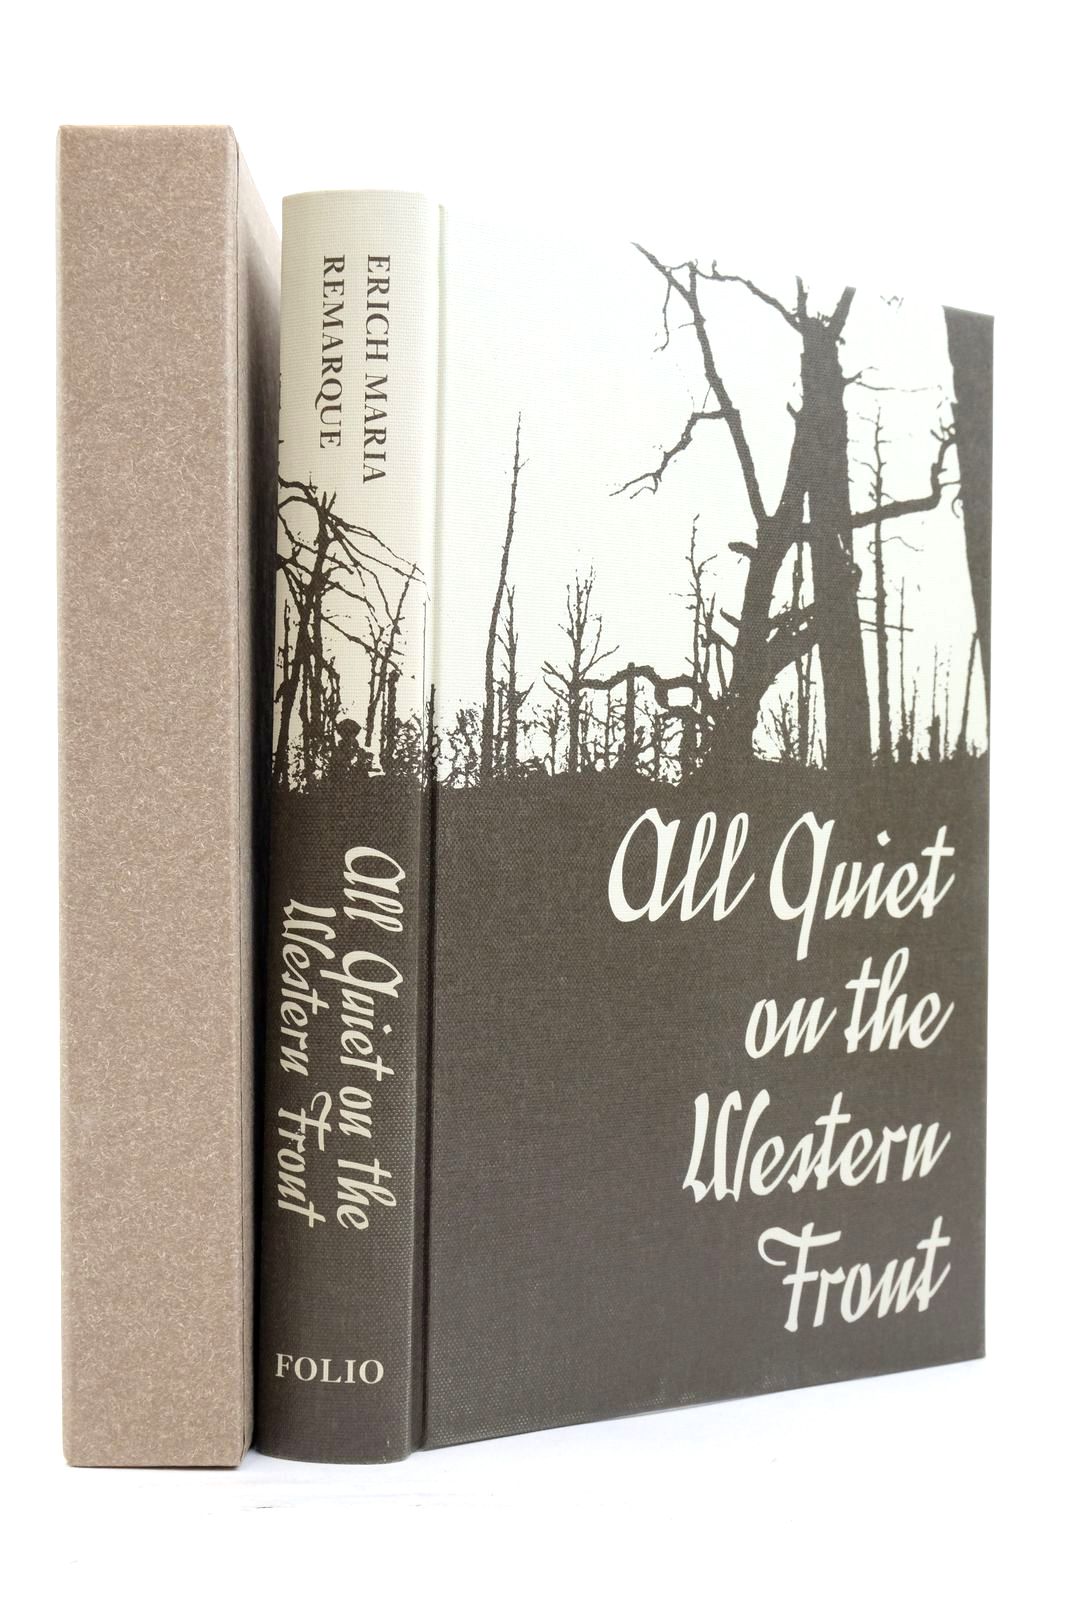 Photo of ALL QUIET ON THE WESTERN FRONT written by Remarque, Erich Maria Murdoch, Brian published by Folio Society (STOCK CODE: 2137939)  for sale by Stella & Rose's Books